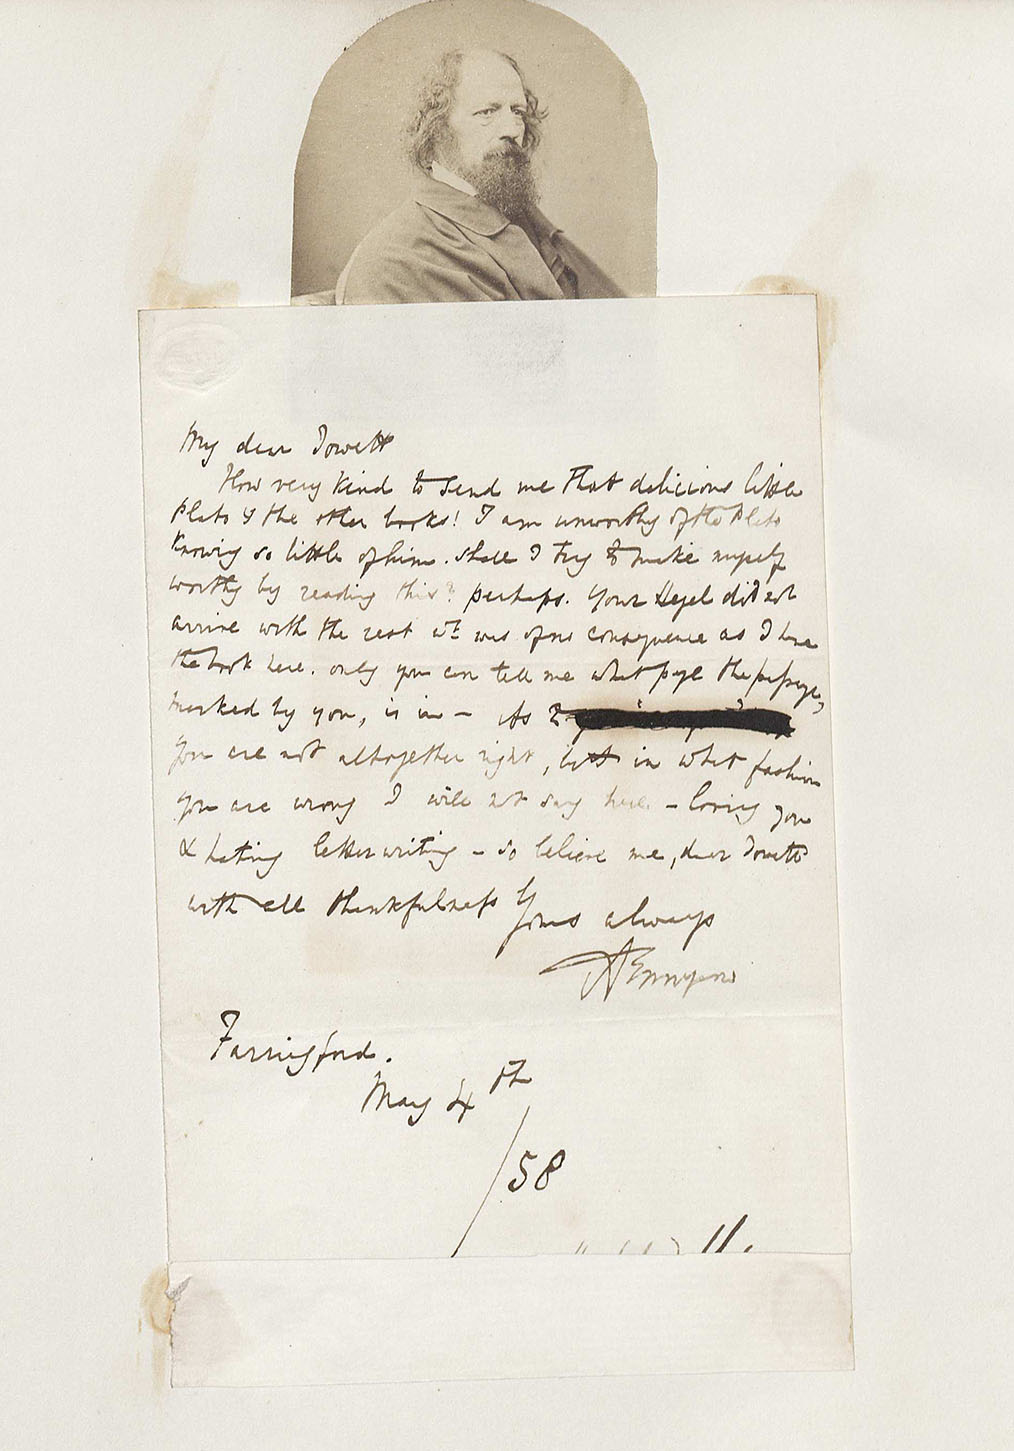 Baron Alfred Tennyson, Letter to Benjamin Jowett, May 4, 1858 (MSS 10499) This is a handwritten letter from Alfred Tennyson to Benjamin Jowett, featuring a picture of Tennyson. In this letter, Tennyson praises the works of Plato and thanks his correspondence, Jowett, for the copies and recommendation of the books. In Tennyson’s opinion, he is “unworthy” of reading Plato’s pieces, but asks Jowett for page numbers as references to key points, and possible favorite sections of the books. 